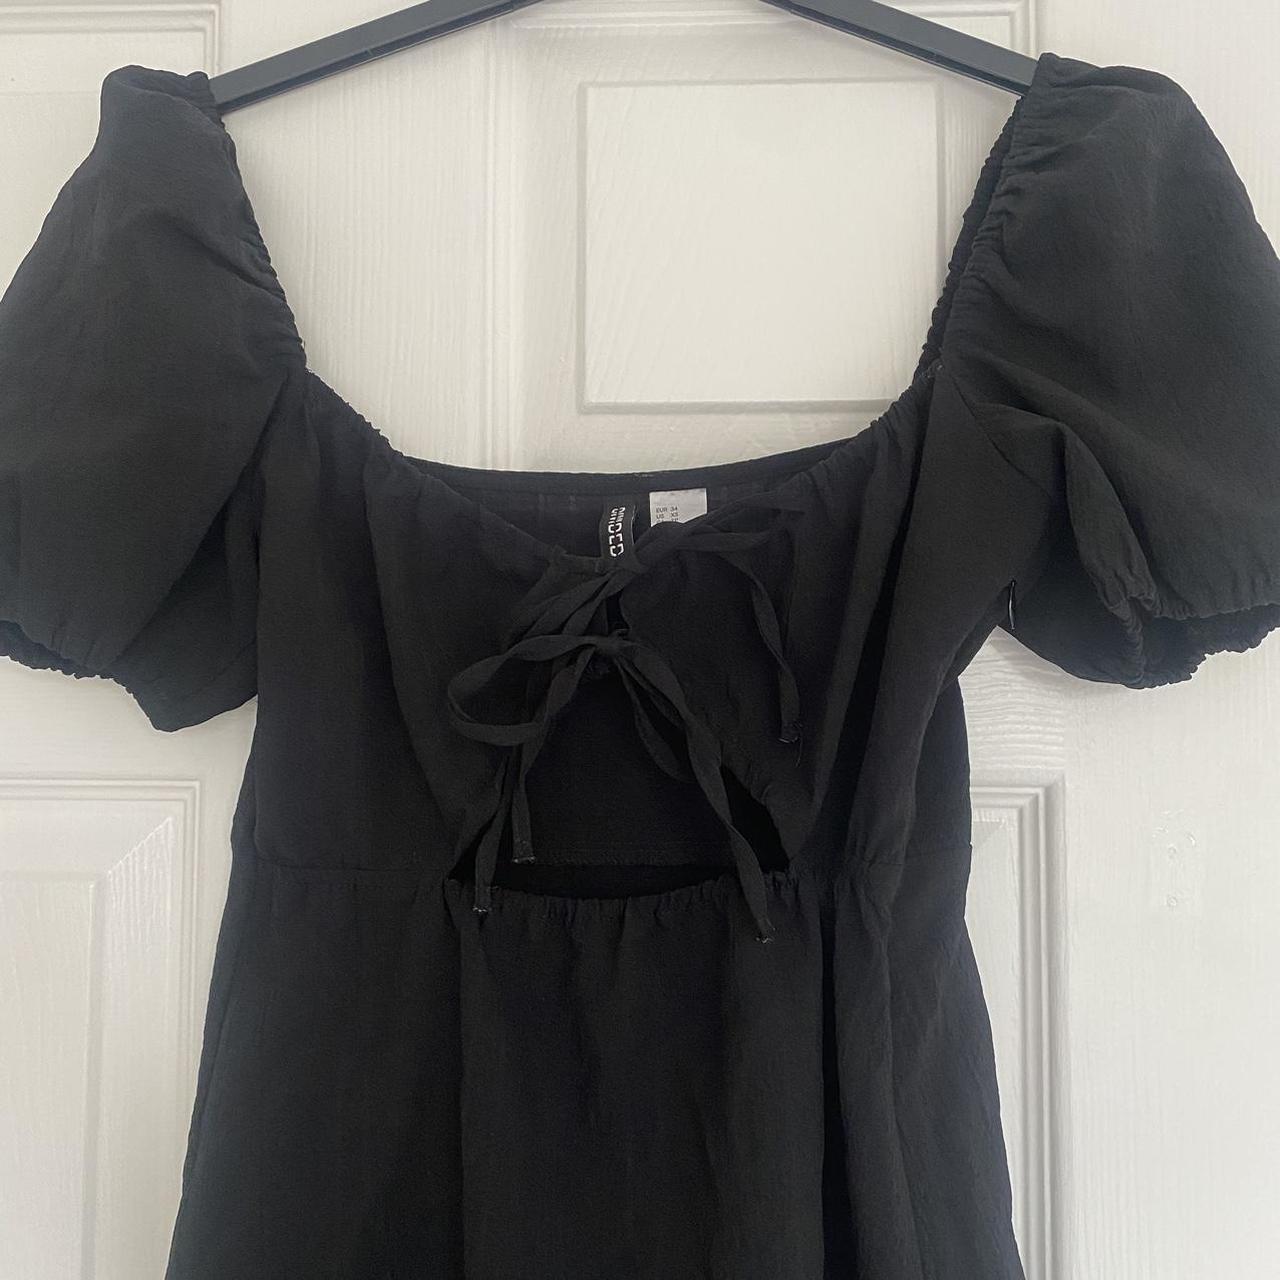 Lovely black milkmaid style mini dress from H&M Size... - Depop